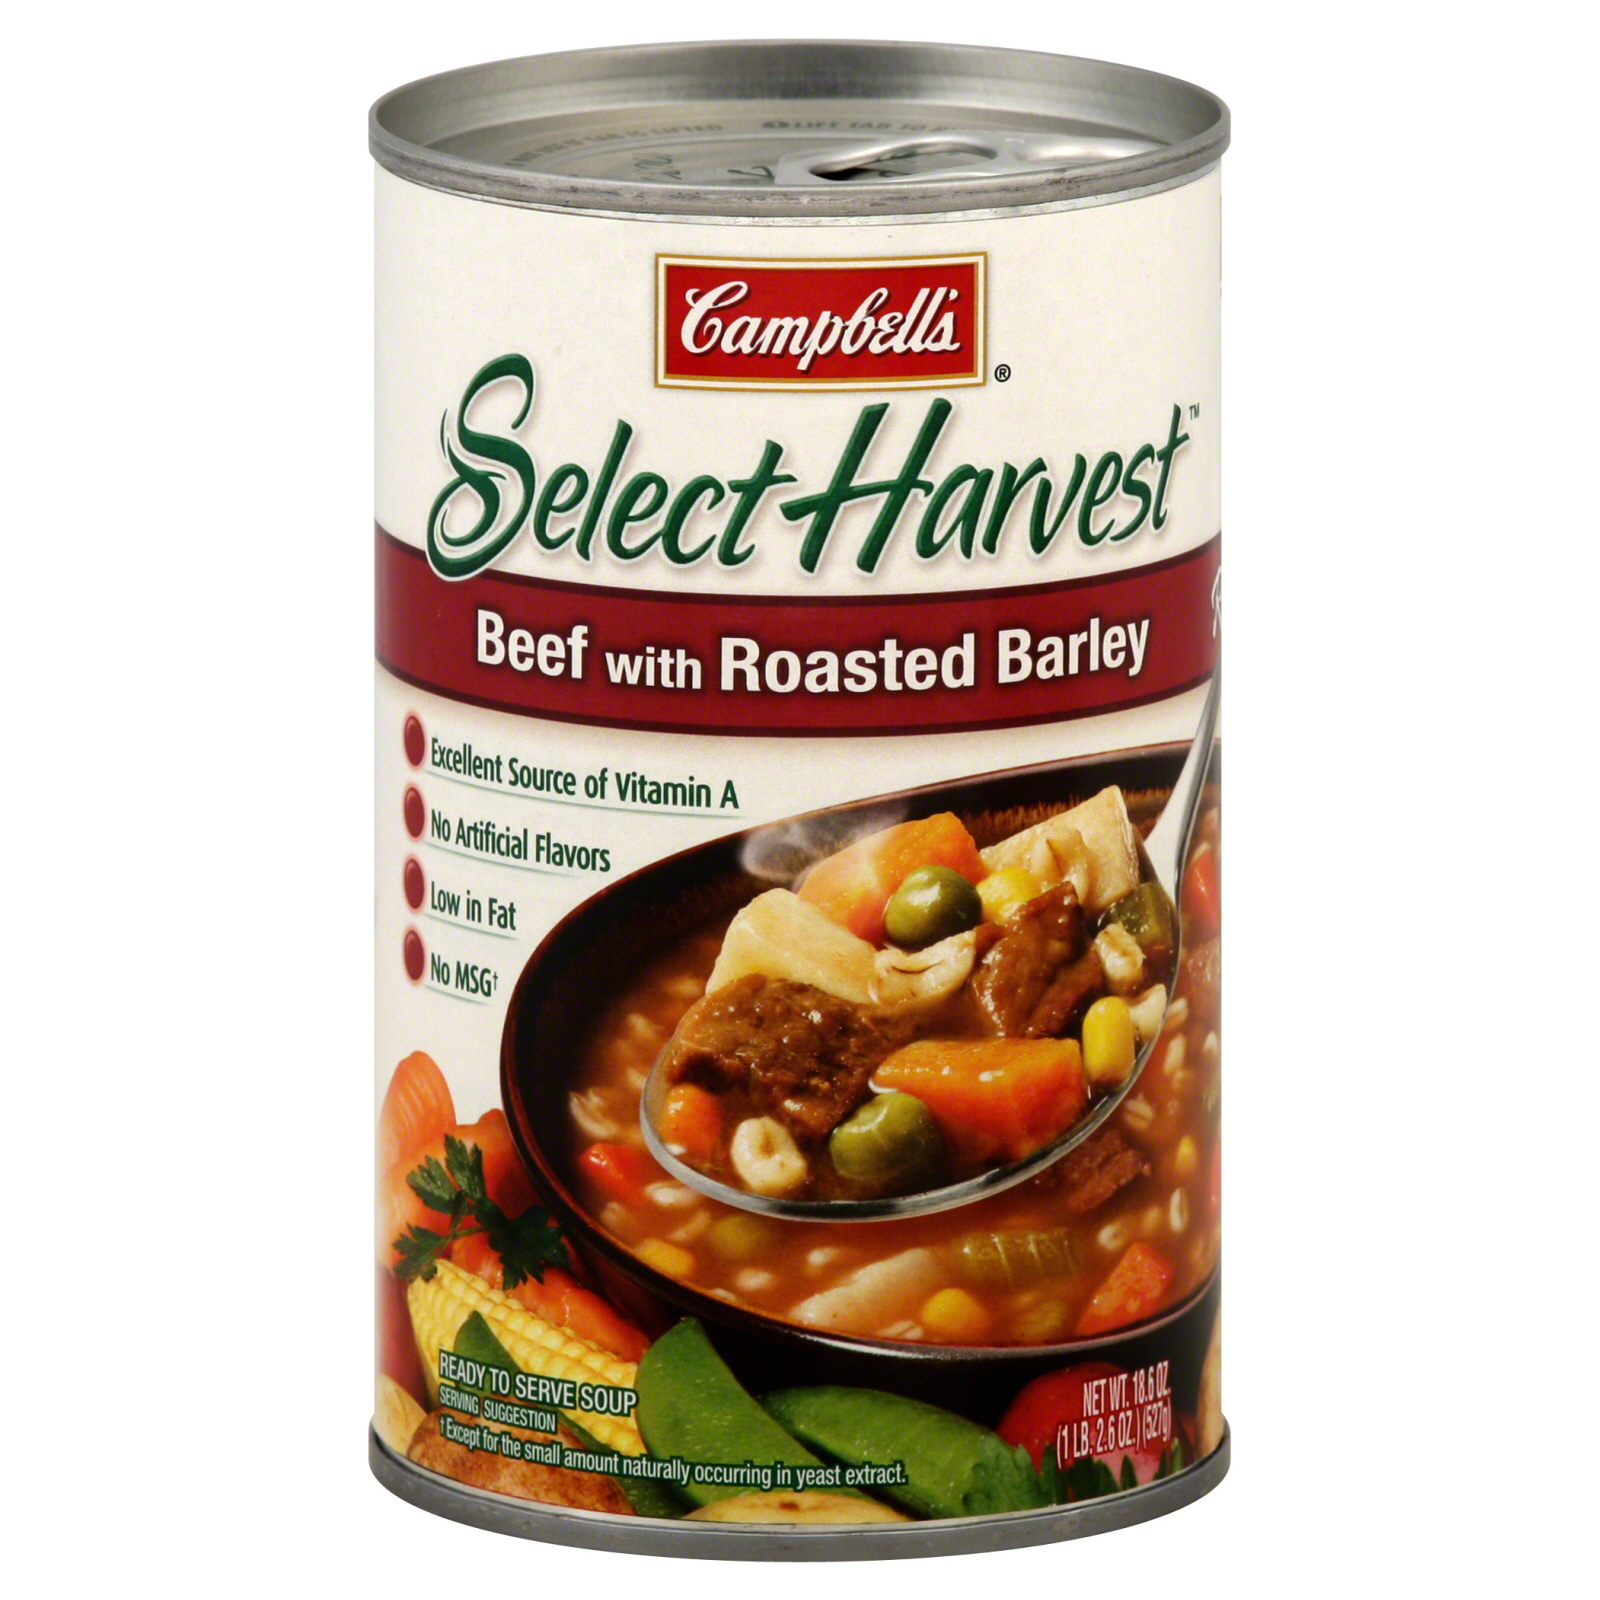 Campbell's Select Harvest Soup, Beef with Roasted Barley, 18.6 oz (1 lb 2.6 oz) 527 g